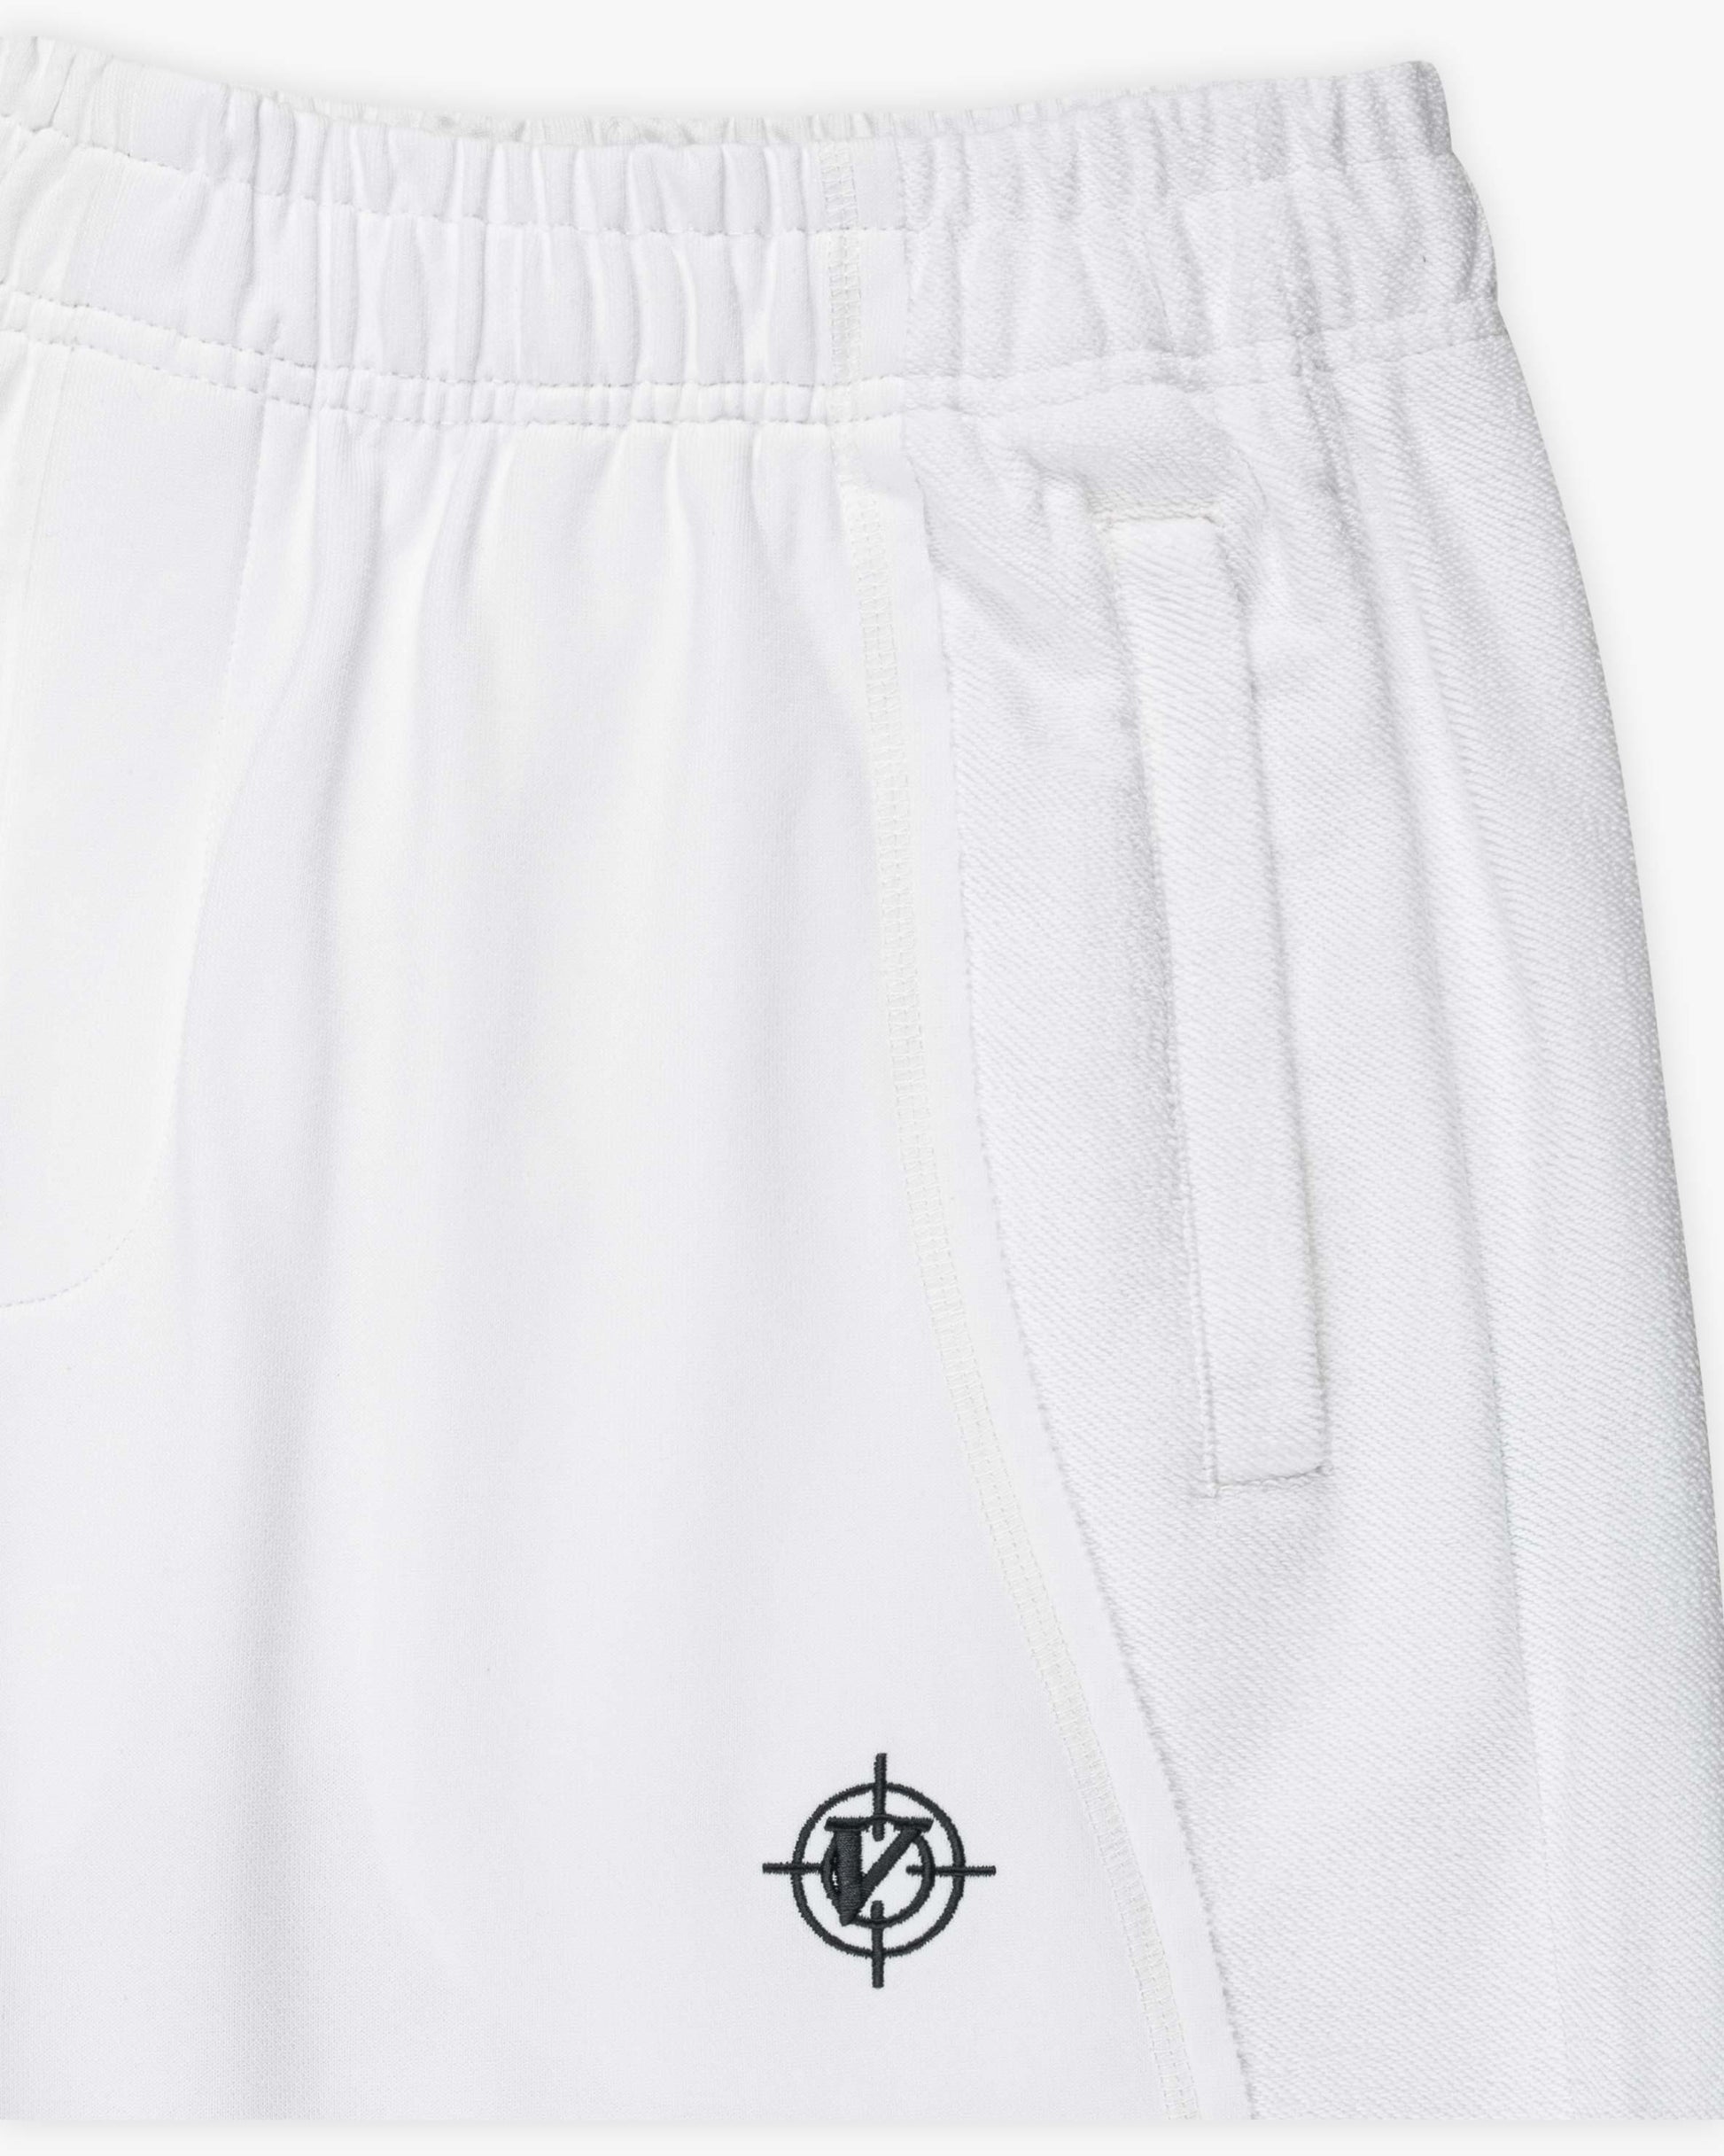 INSIDE OUT JOGGER WHITE - VICINITY